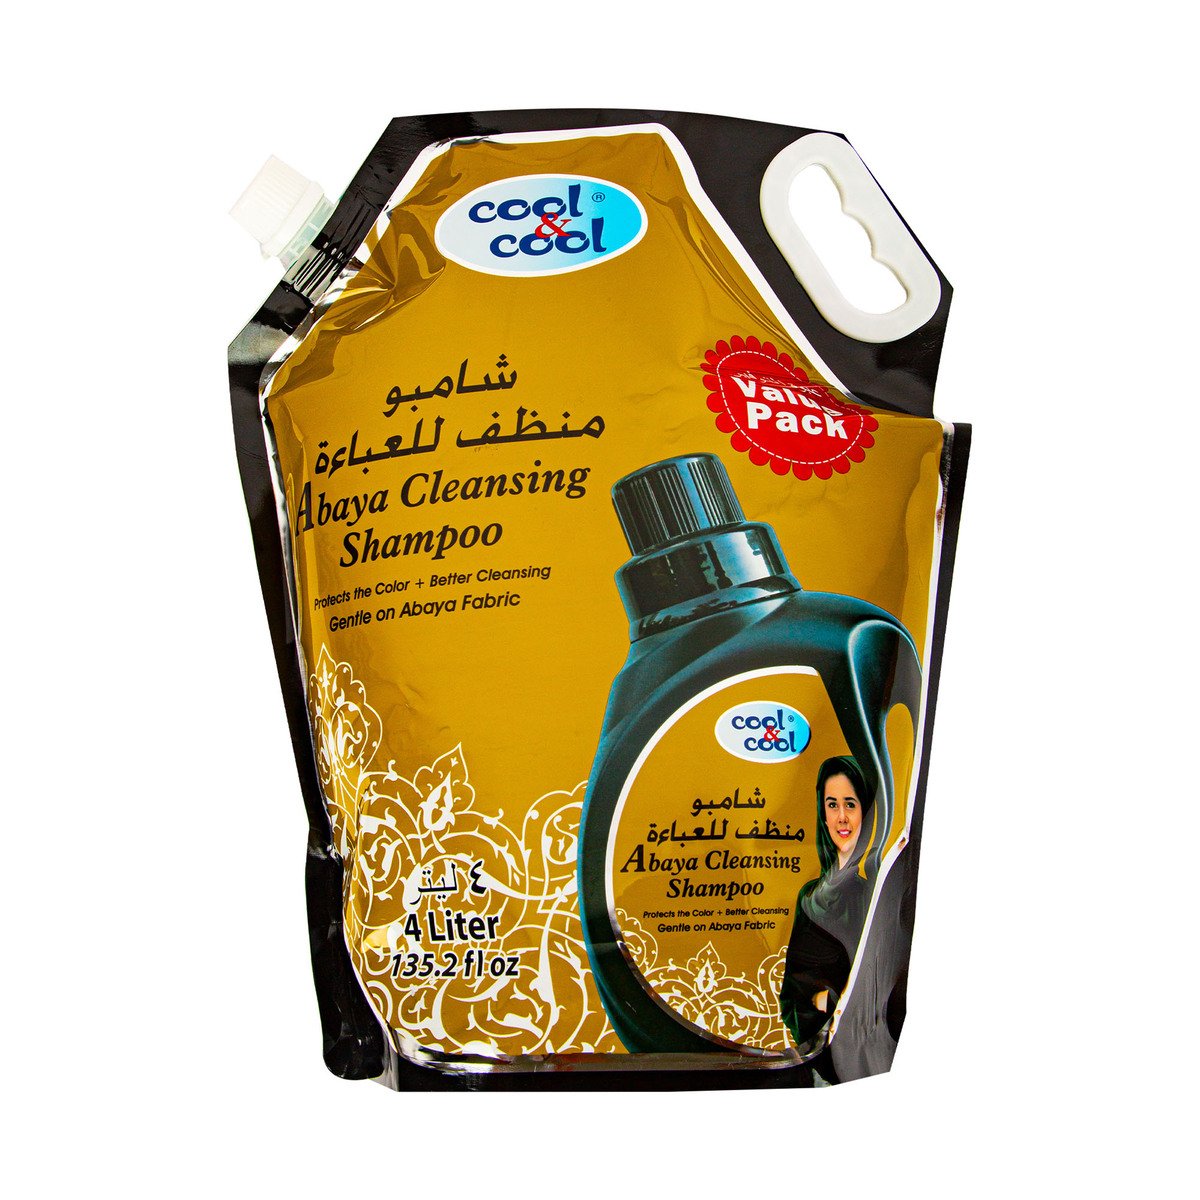 Cool & Cool Abaya Cleansing Shampoo Value Pack 4 Litres